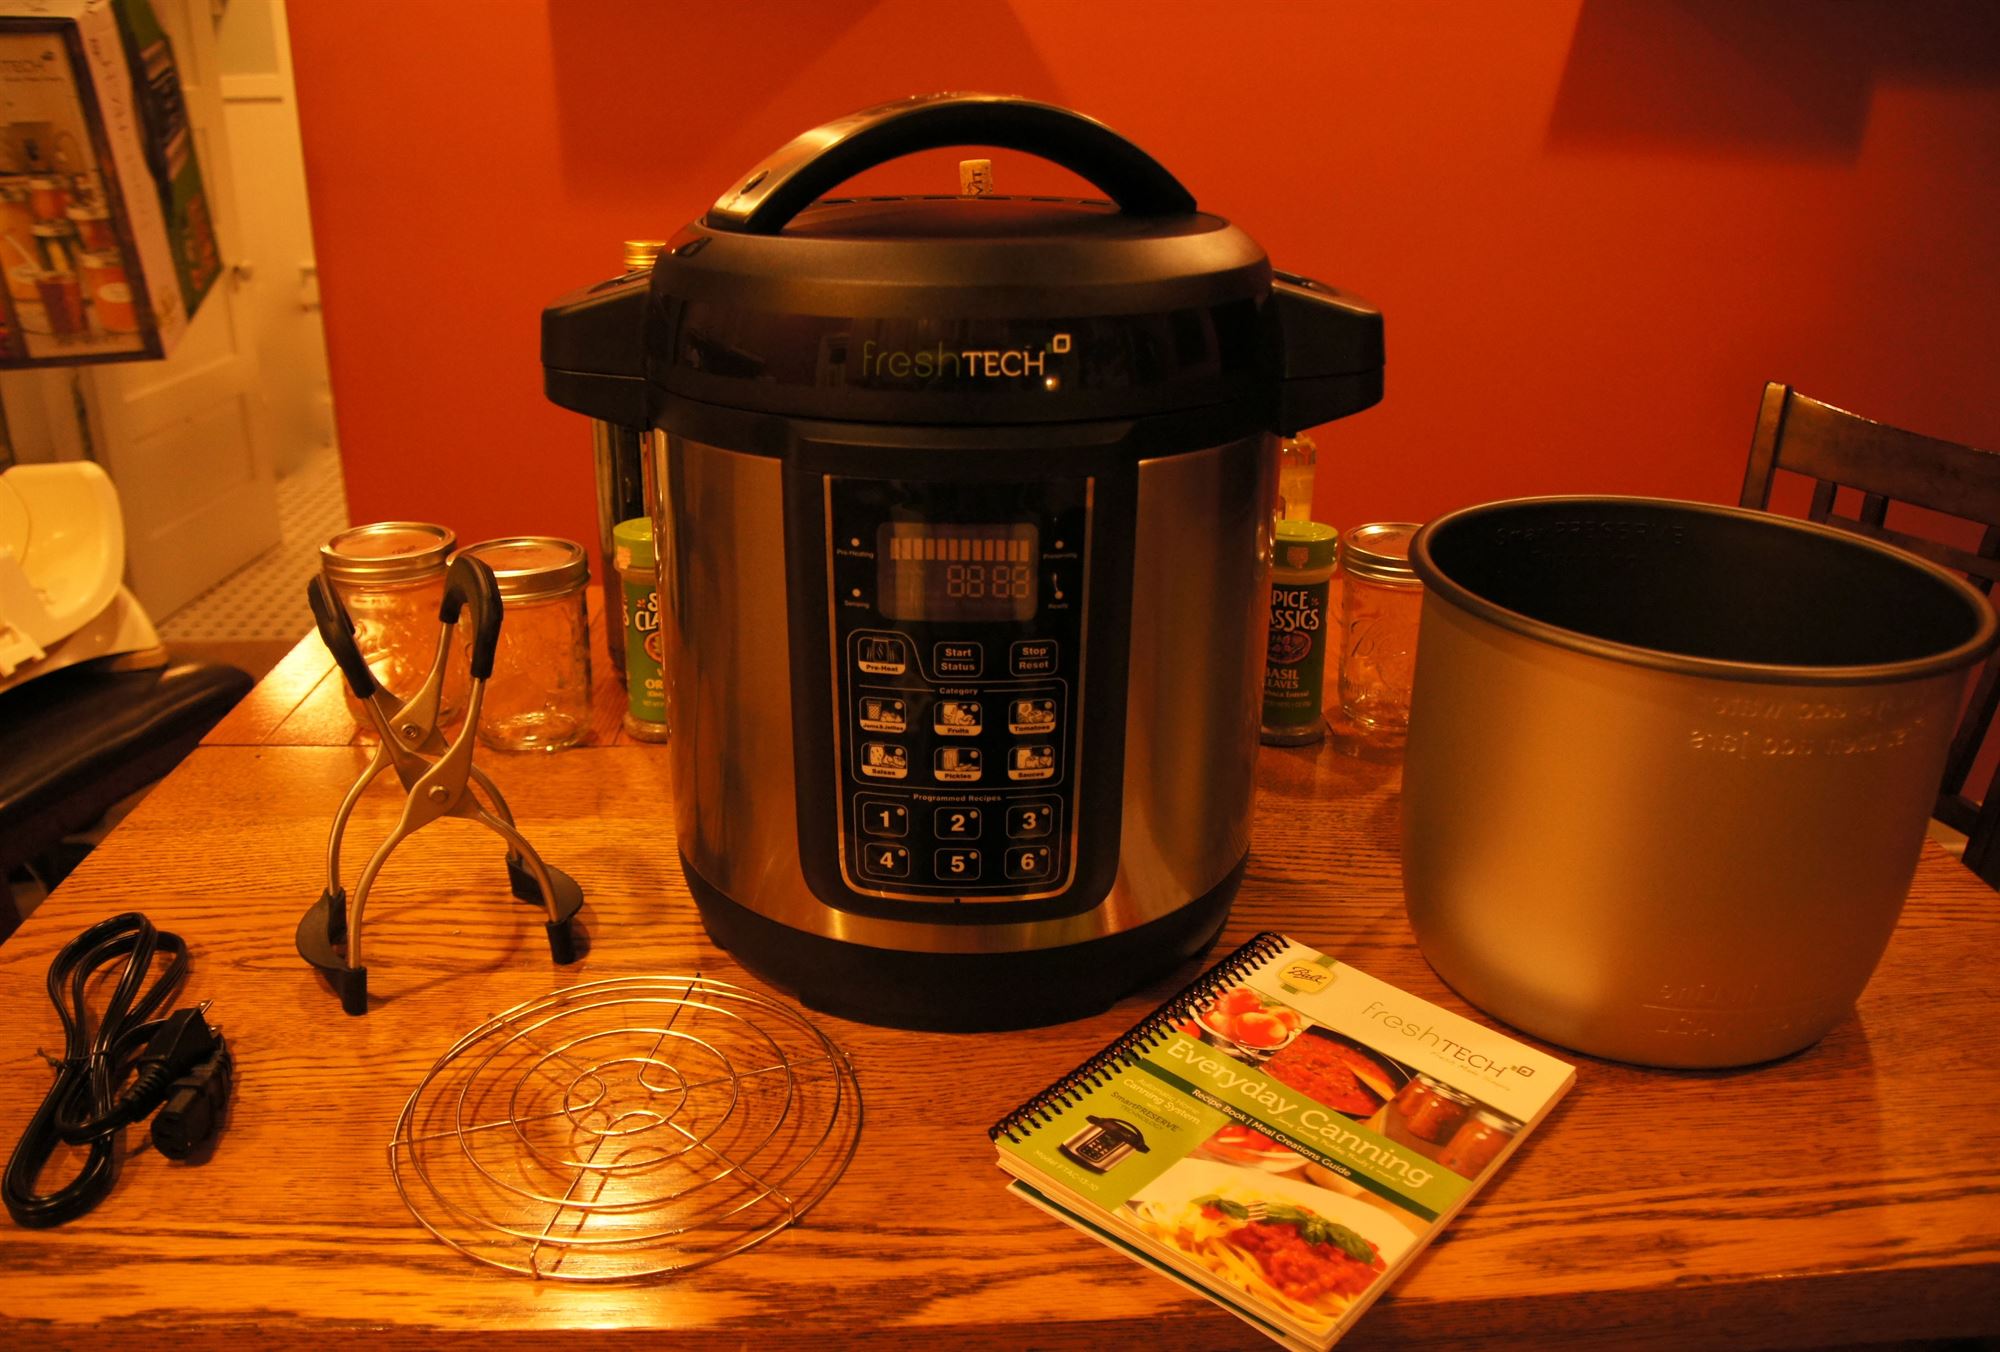 The Ball freshTECH Automatic Home Canning System was complete with a cookbook!